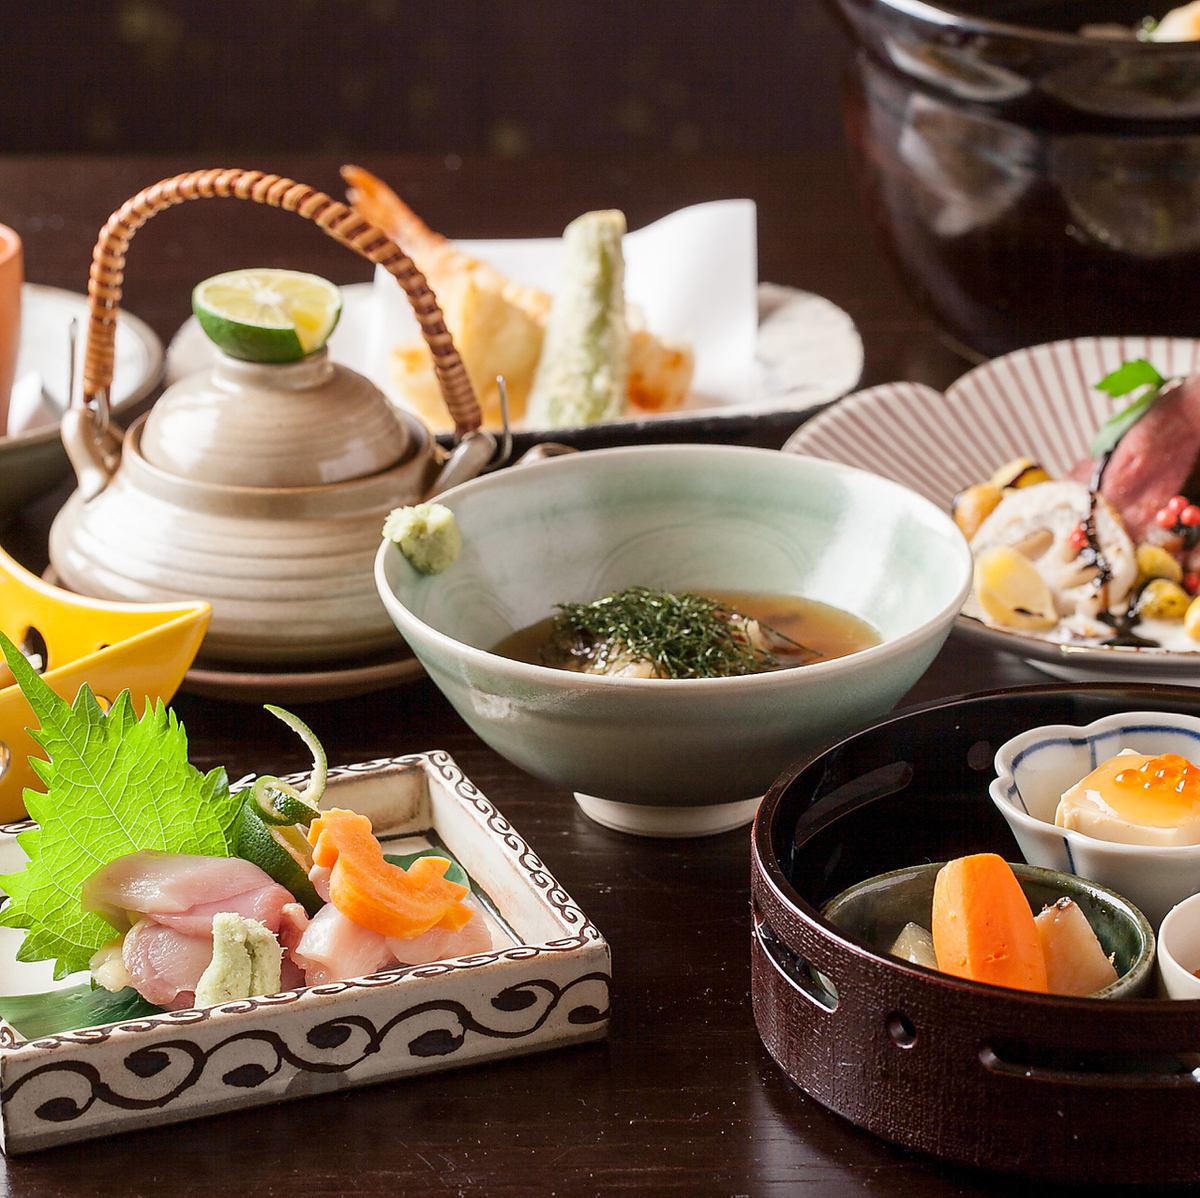 Please enjoy our specialty seasonal Kyoto vegetables and Nanaya chicken dishes!